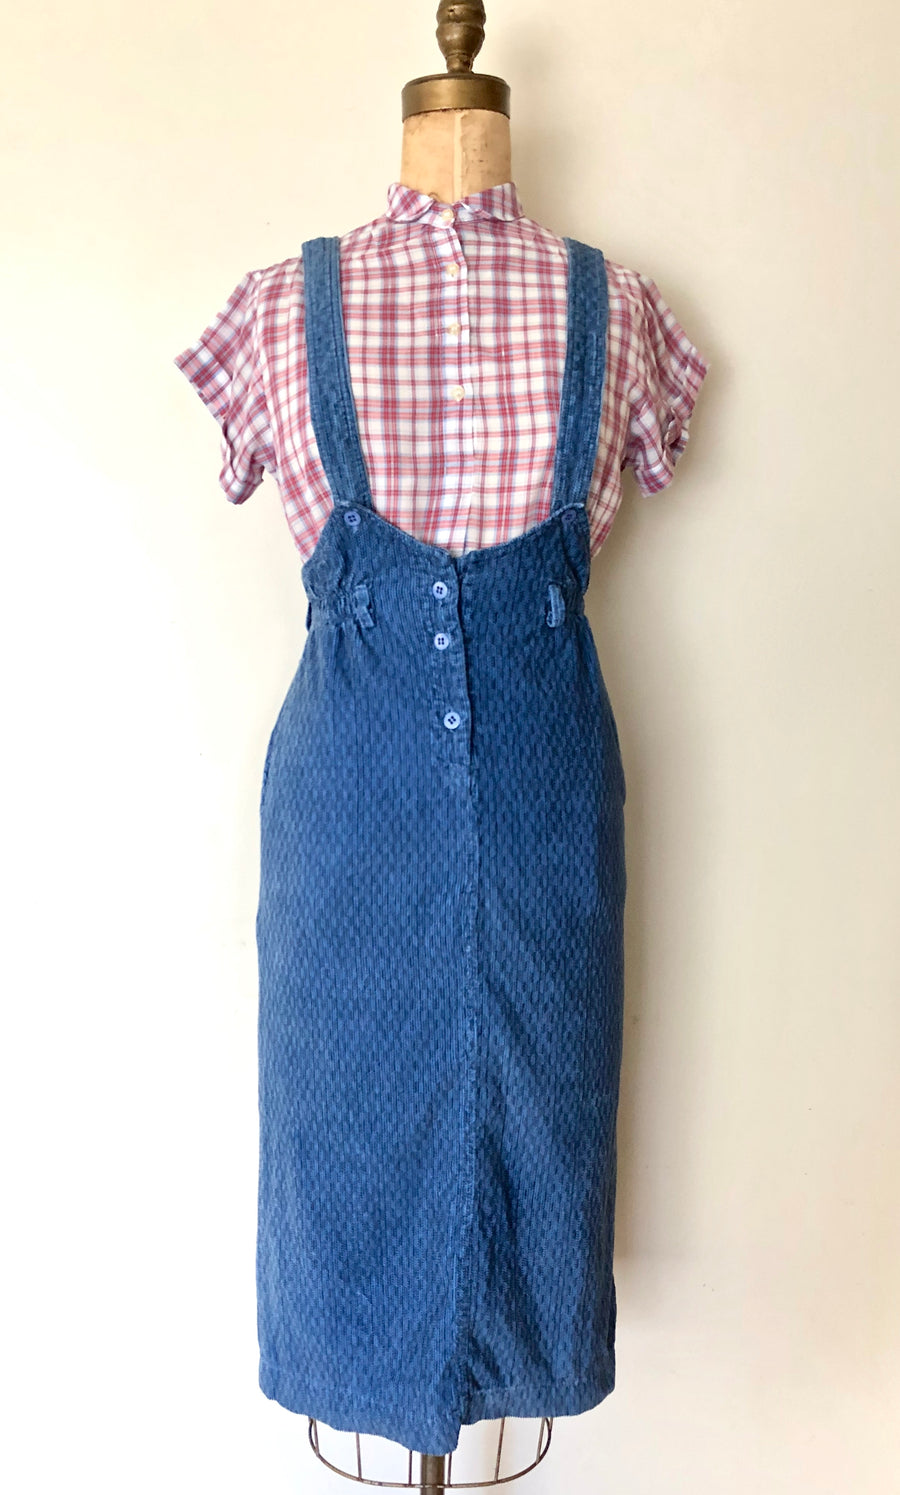 80's Corduroy Pinafore Skirt - Size Small